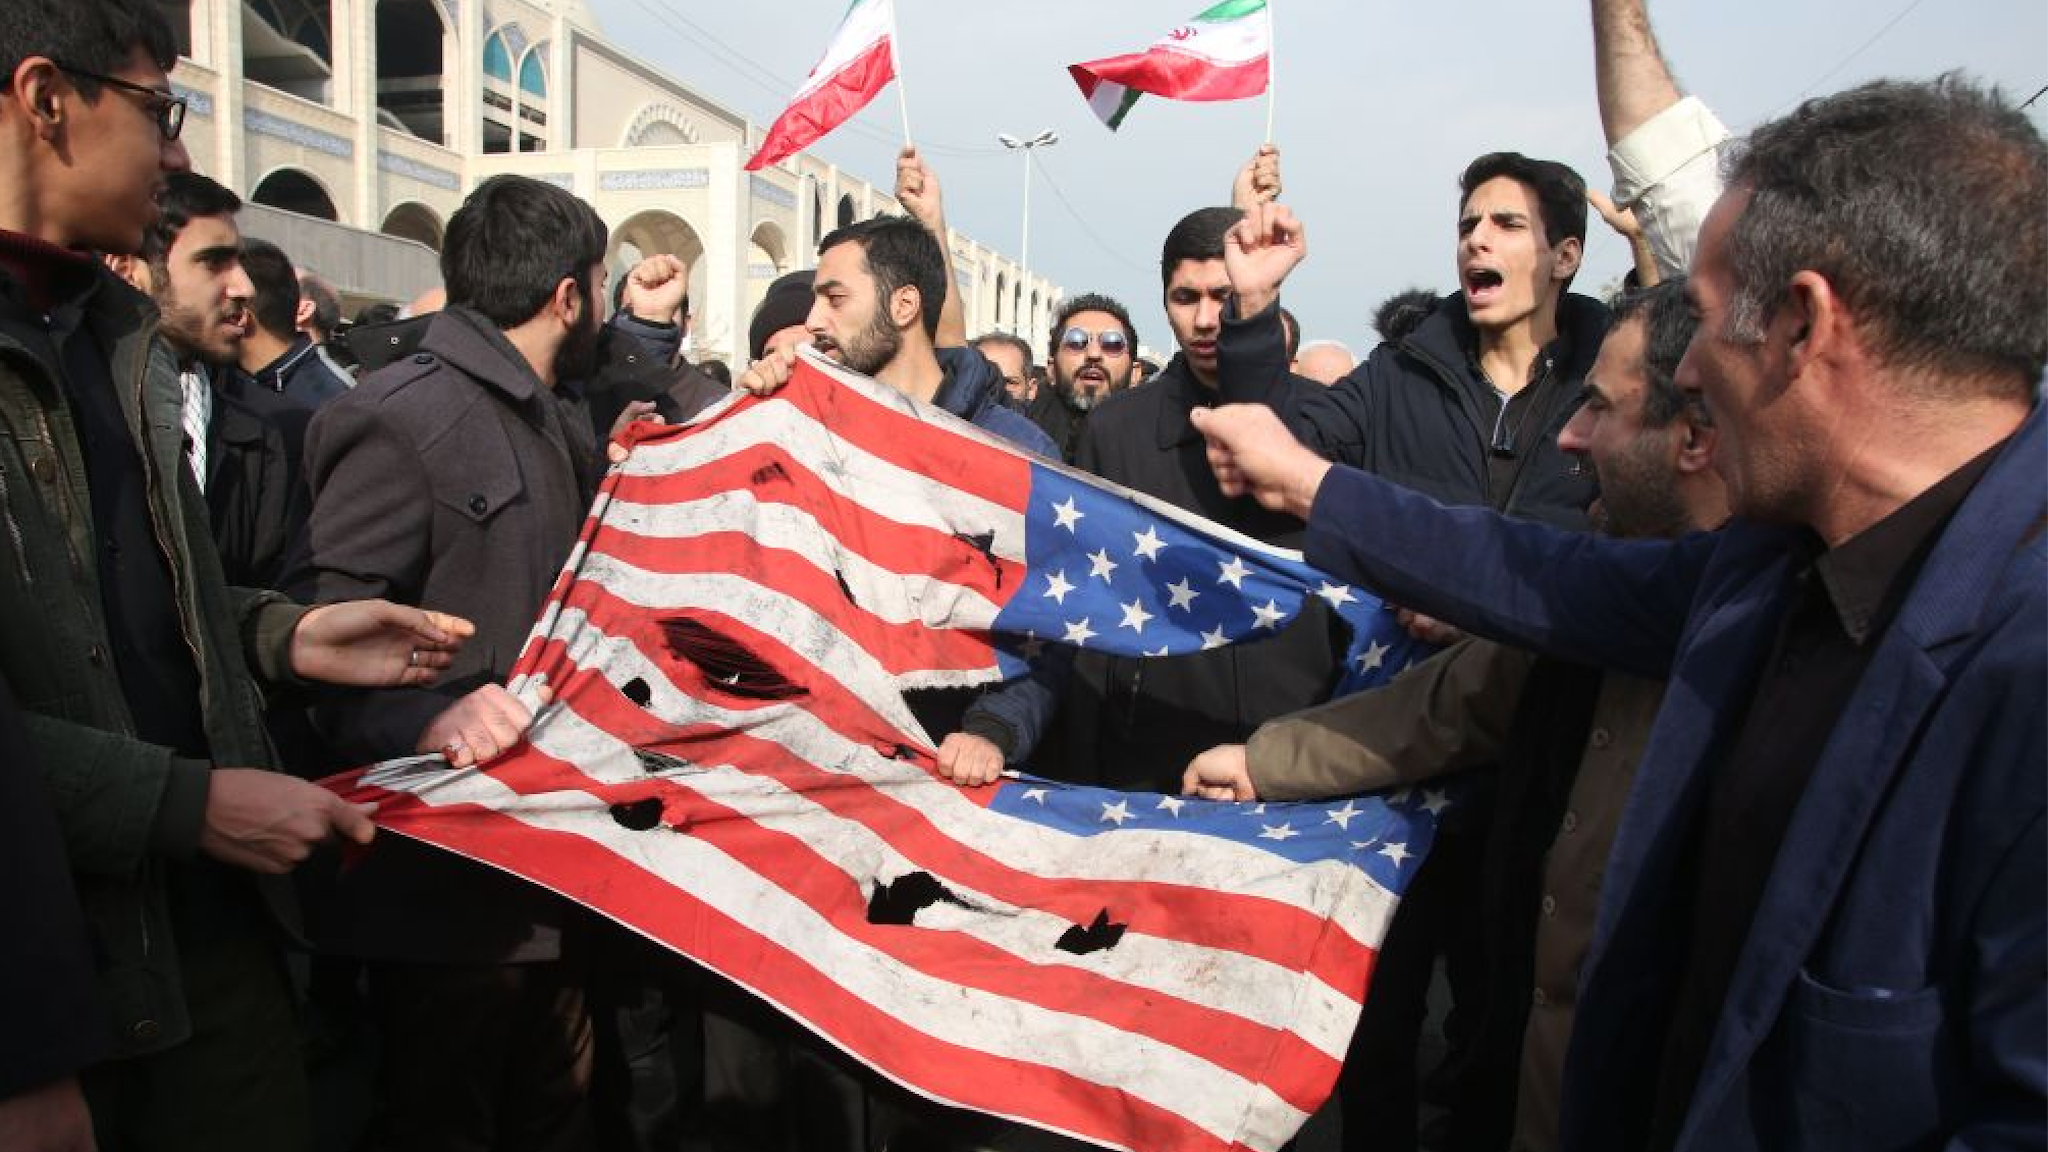 Iranians tear up a US flag during a demonstration in Tehran on January 3, 2020 following the killing of Iranian Revolutionary Guards Major General Qasem Soleimani in a US strike on his convoy at Baghdad international airport.